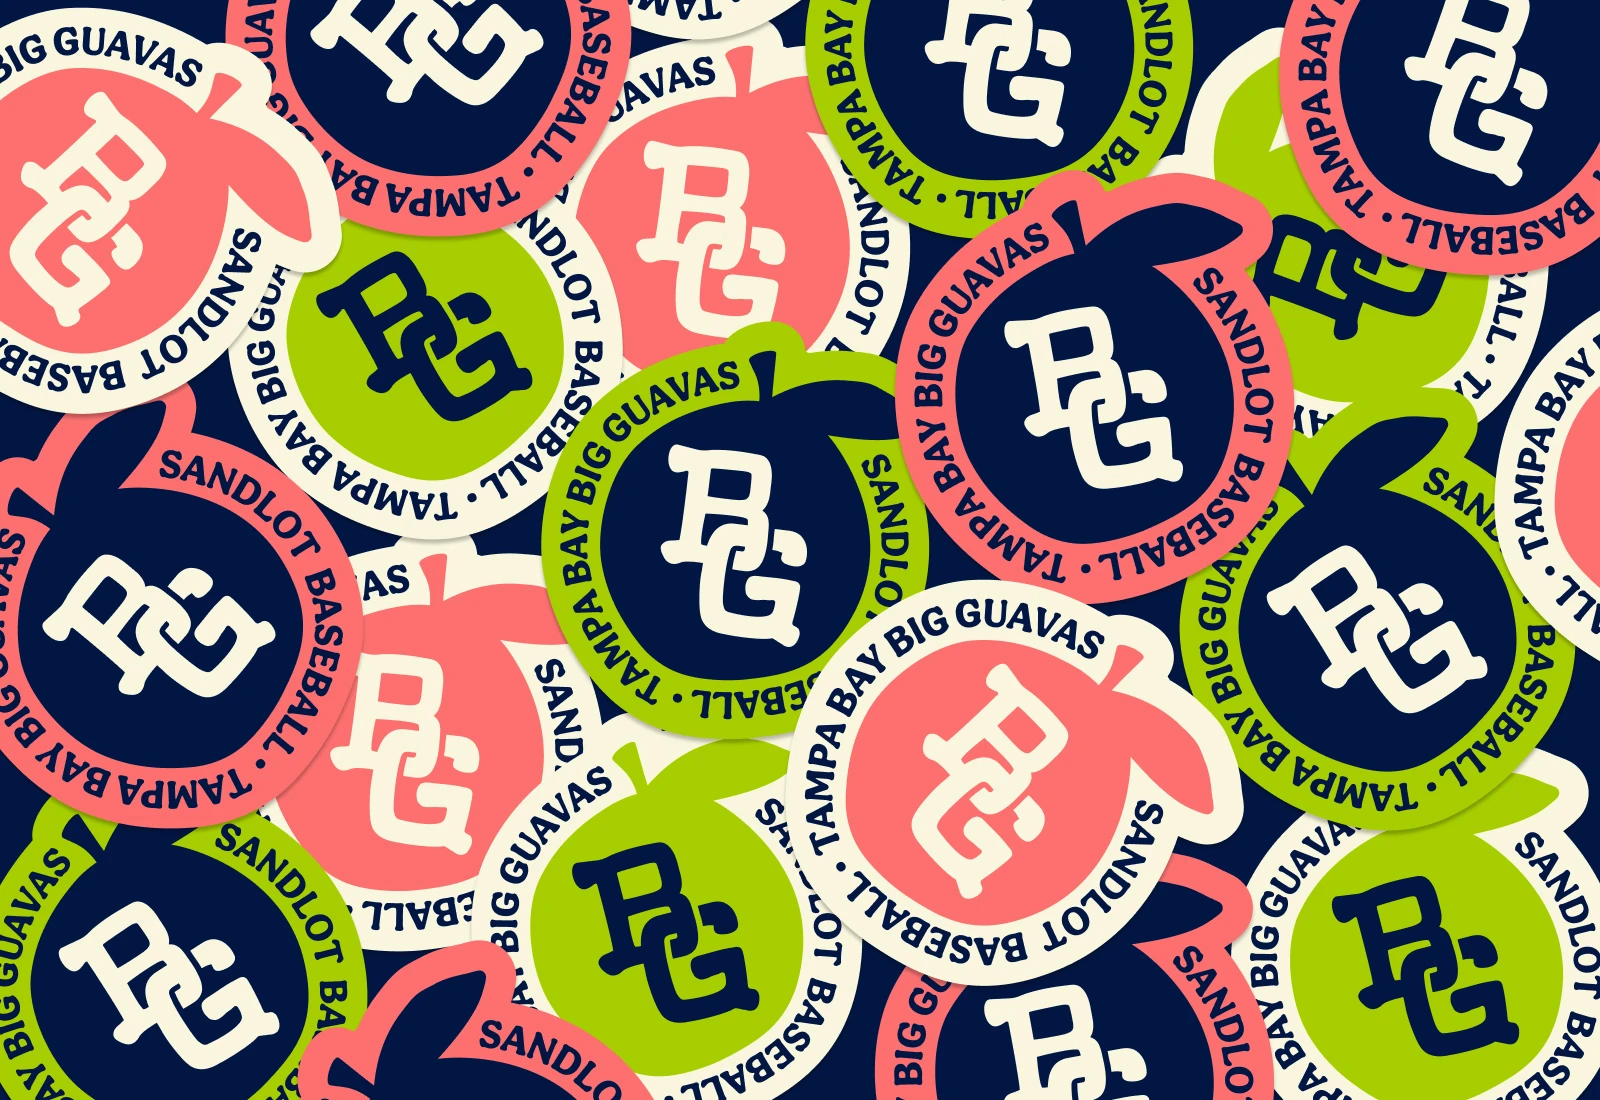 A scattered display of various Big Guavas stickers featuring the BG monogram